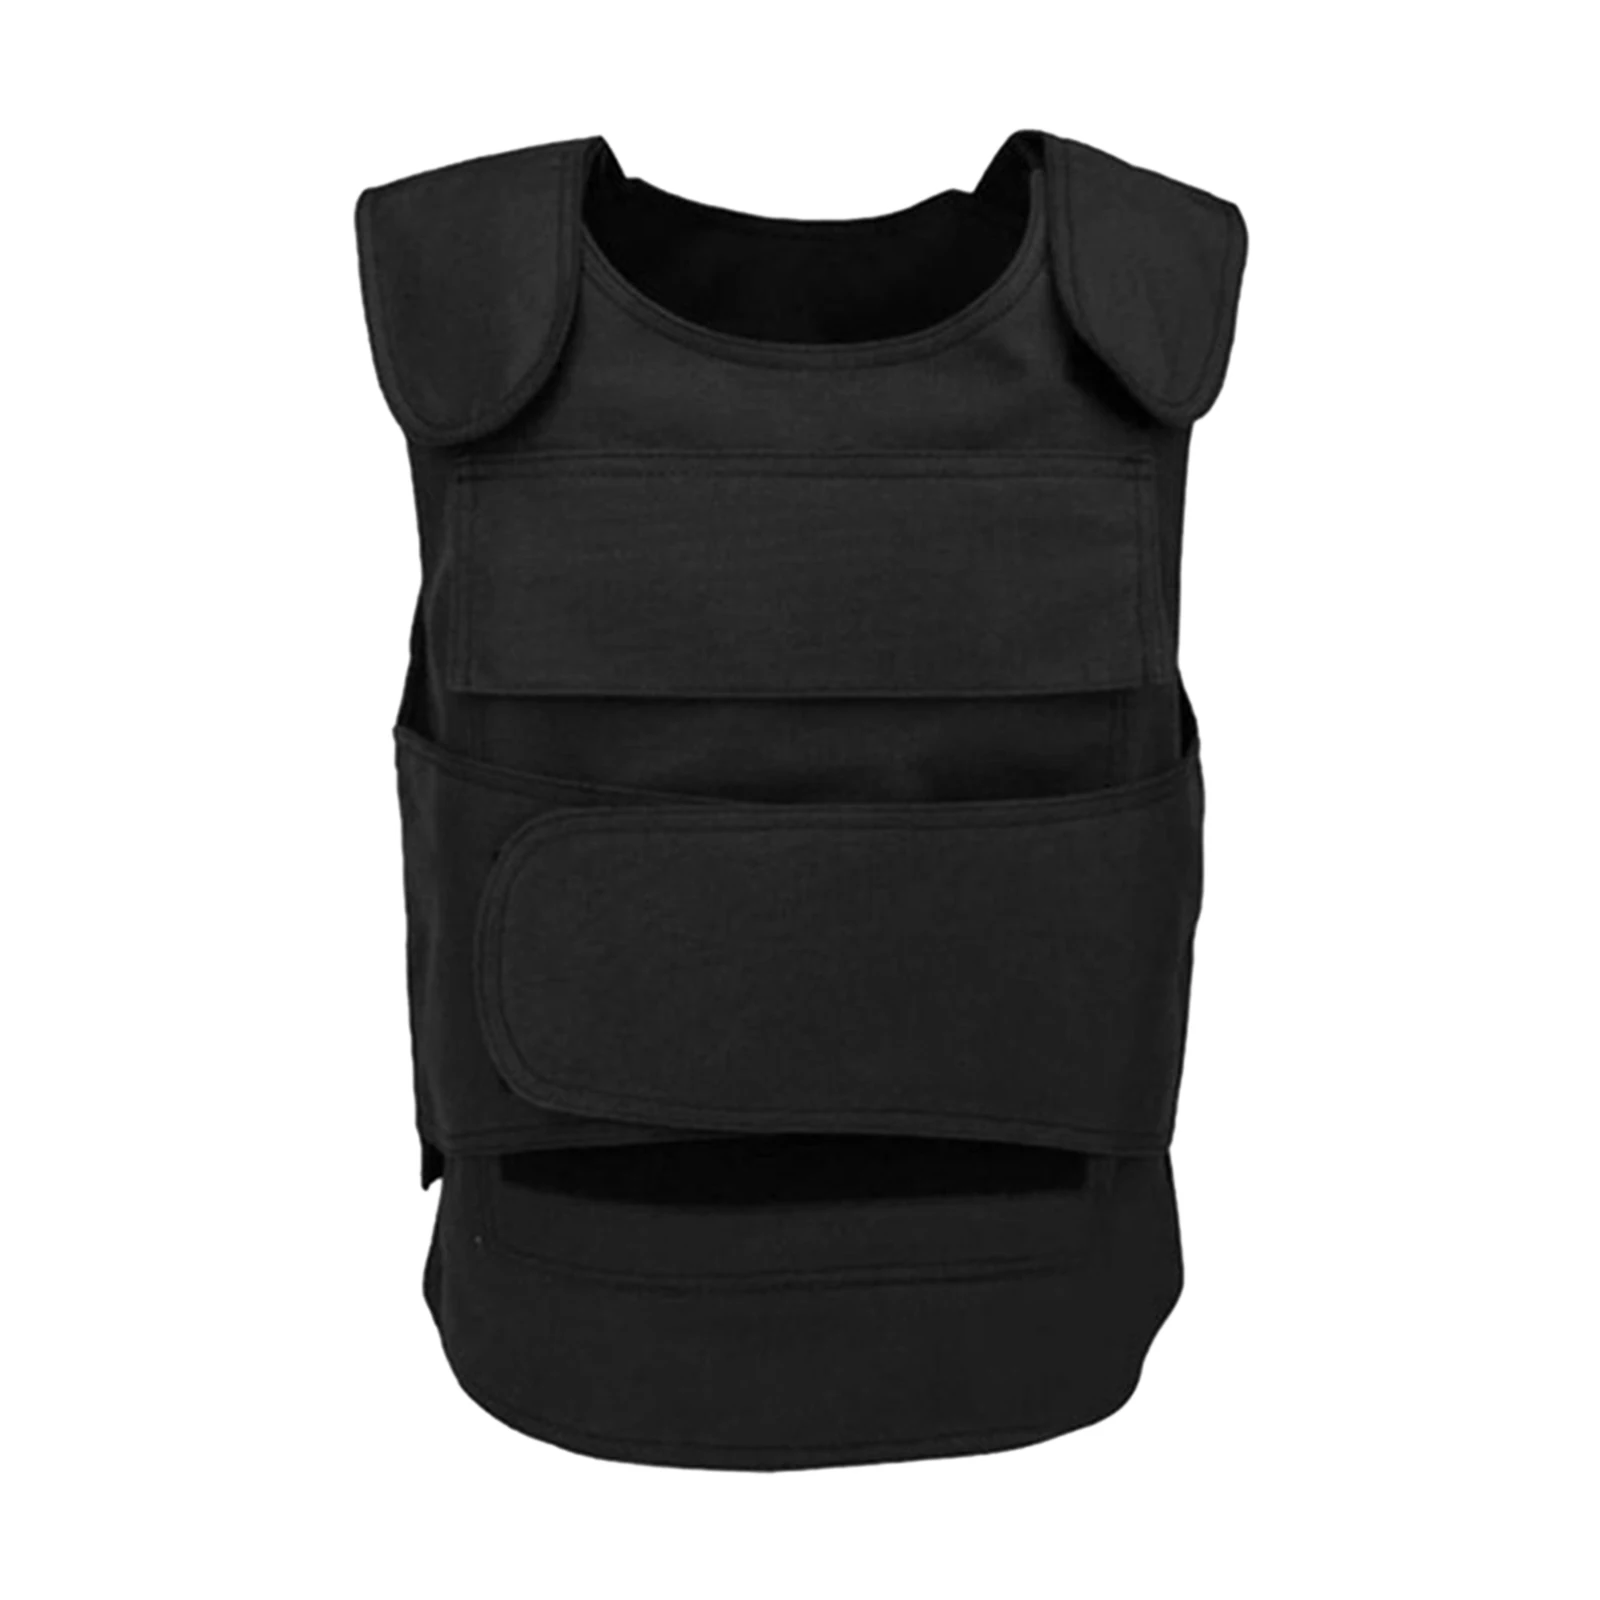 Utility Nylon Tactical Vest Outdoor Gaming Modular Plate Carrier Game Training Lightweight Vests Safety Hunting for Adults